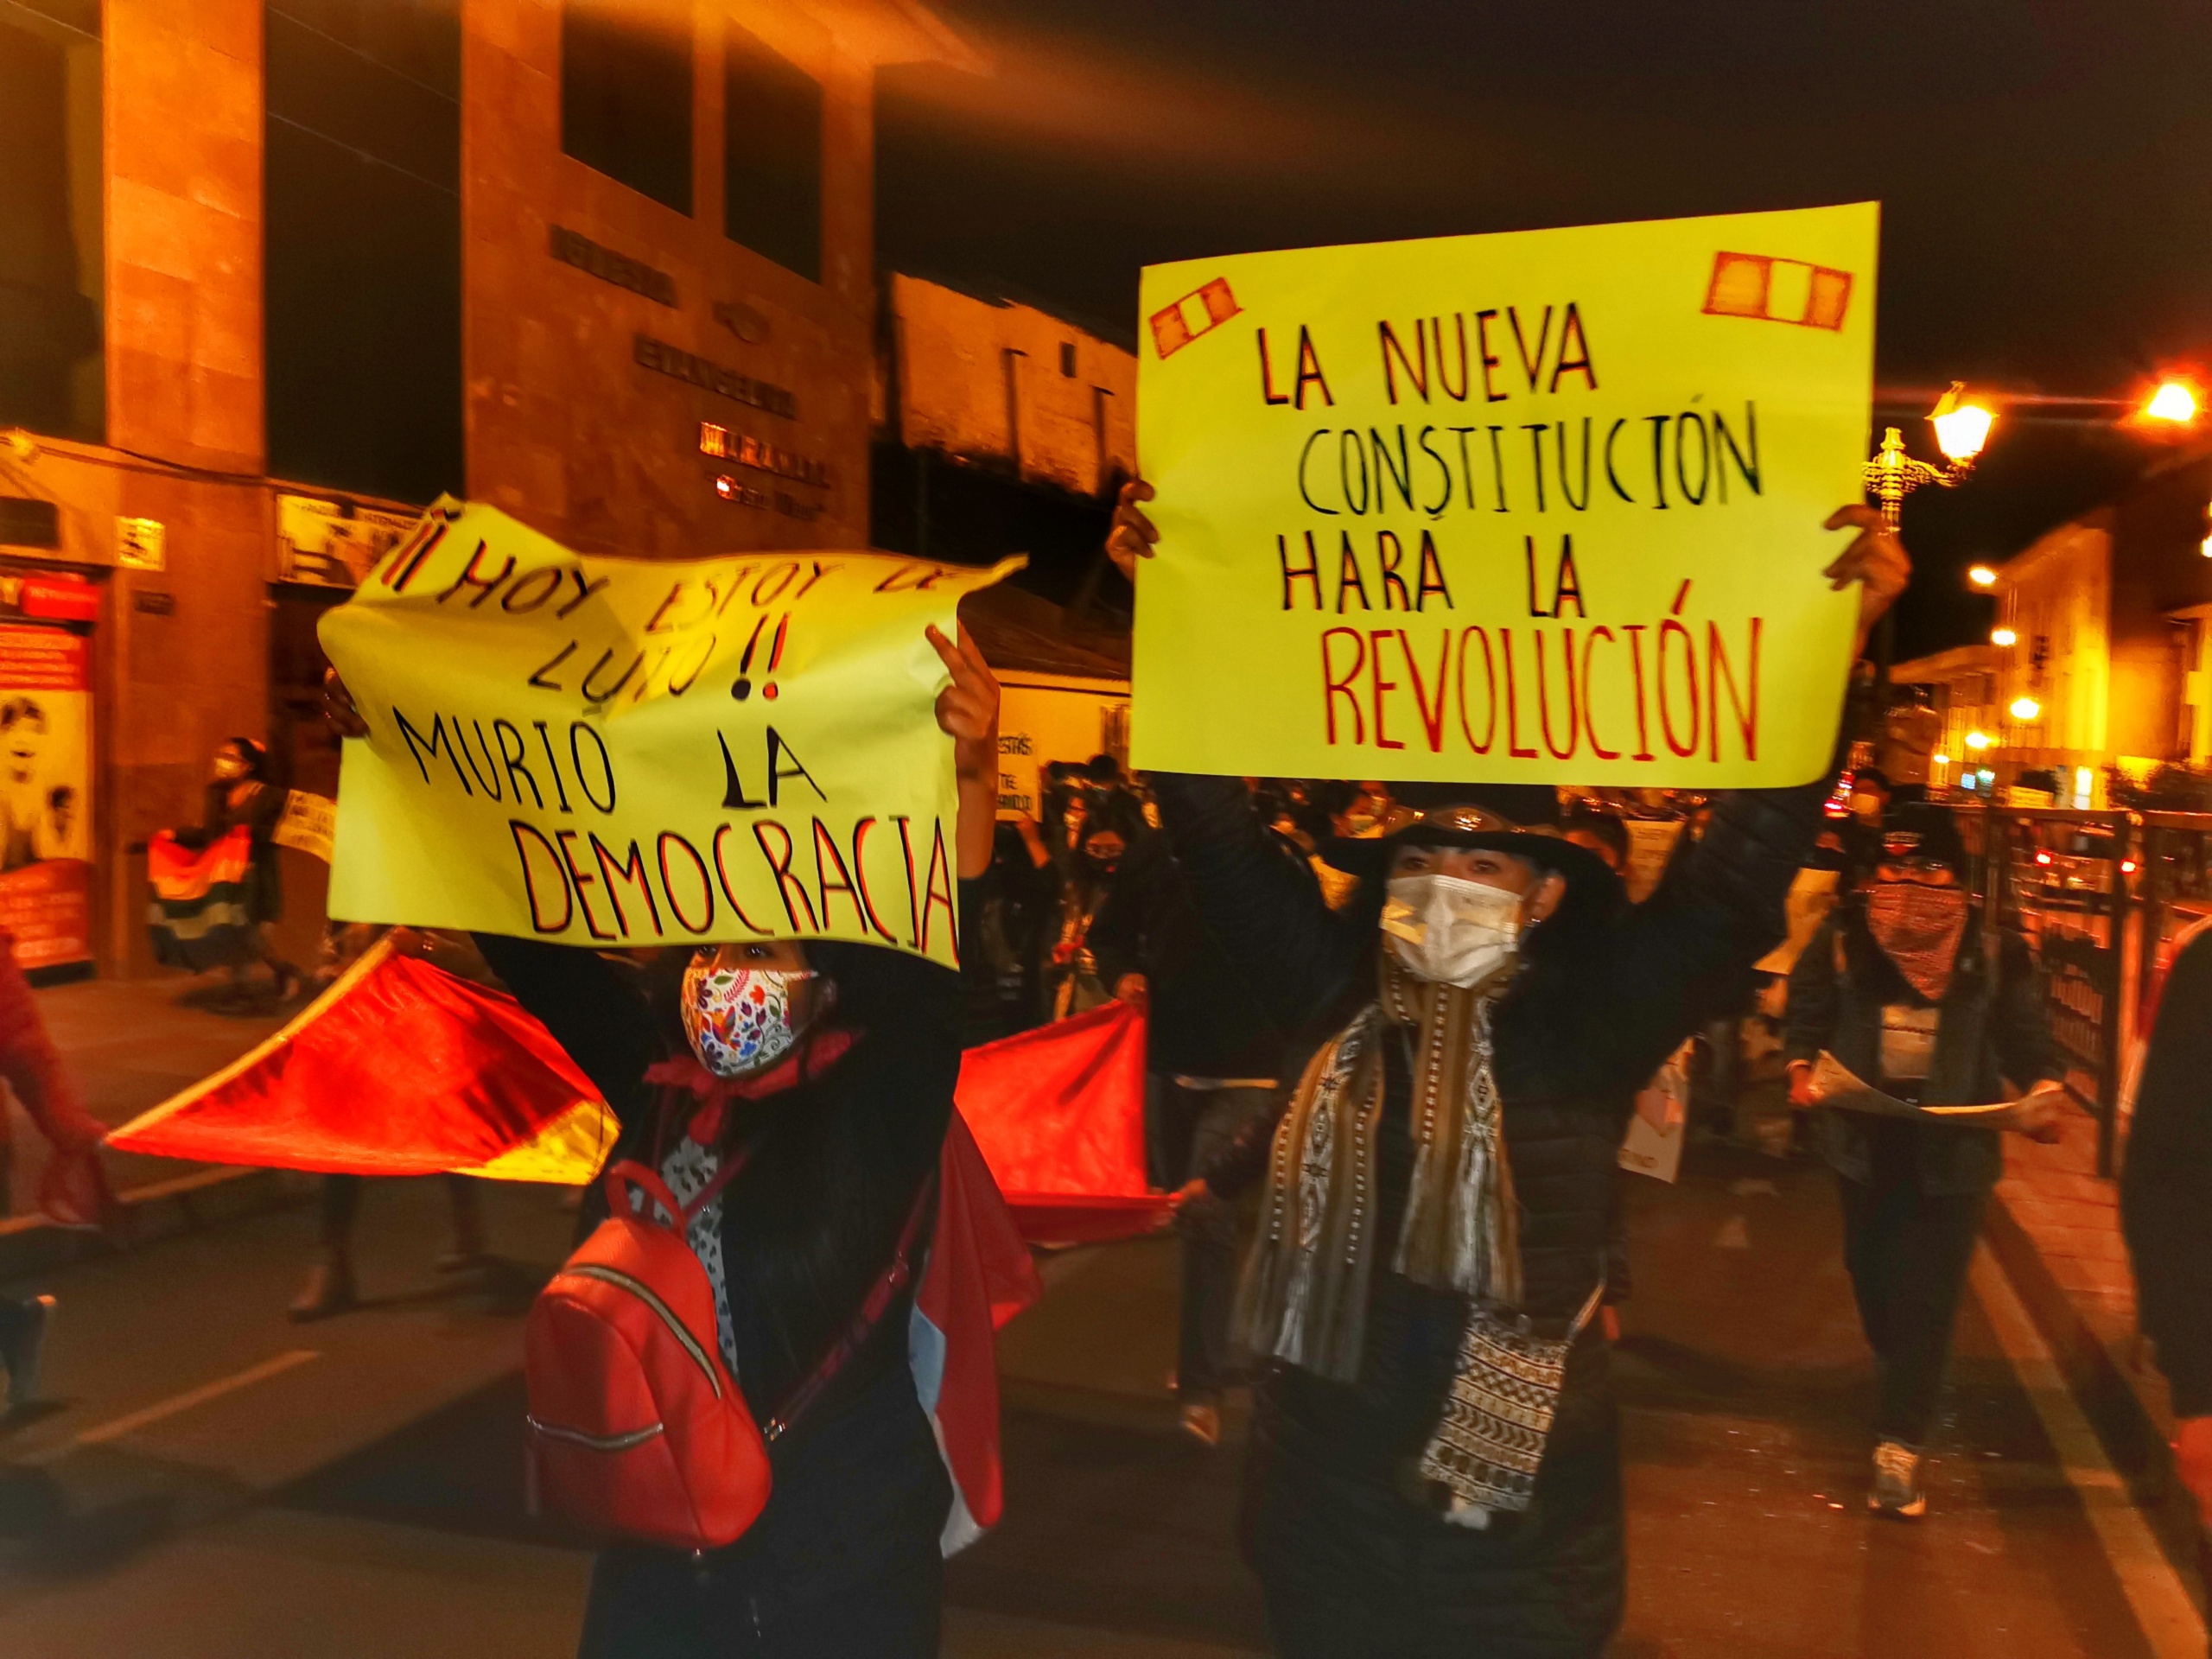 Sign #1: “Today I am mourning! Democracy has died“ / Sign #2: The new constitution will make the revolution” Photo: Diamira Daza Valenzuela